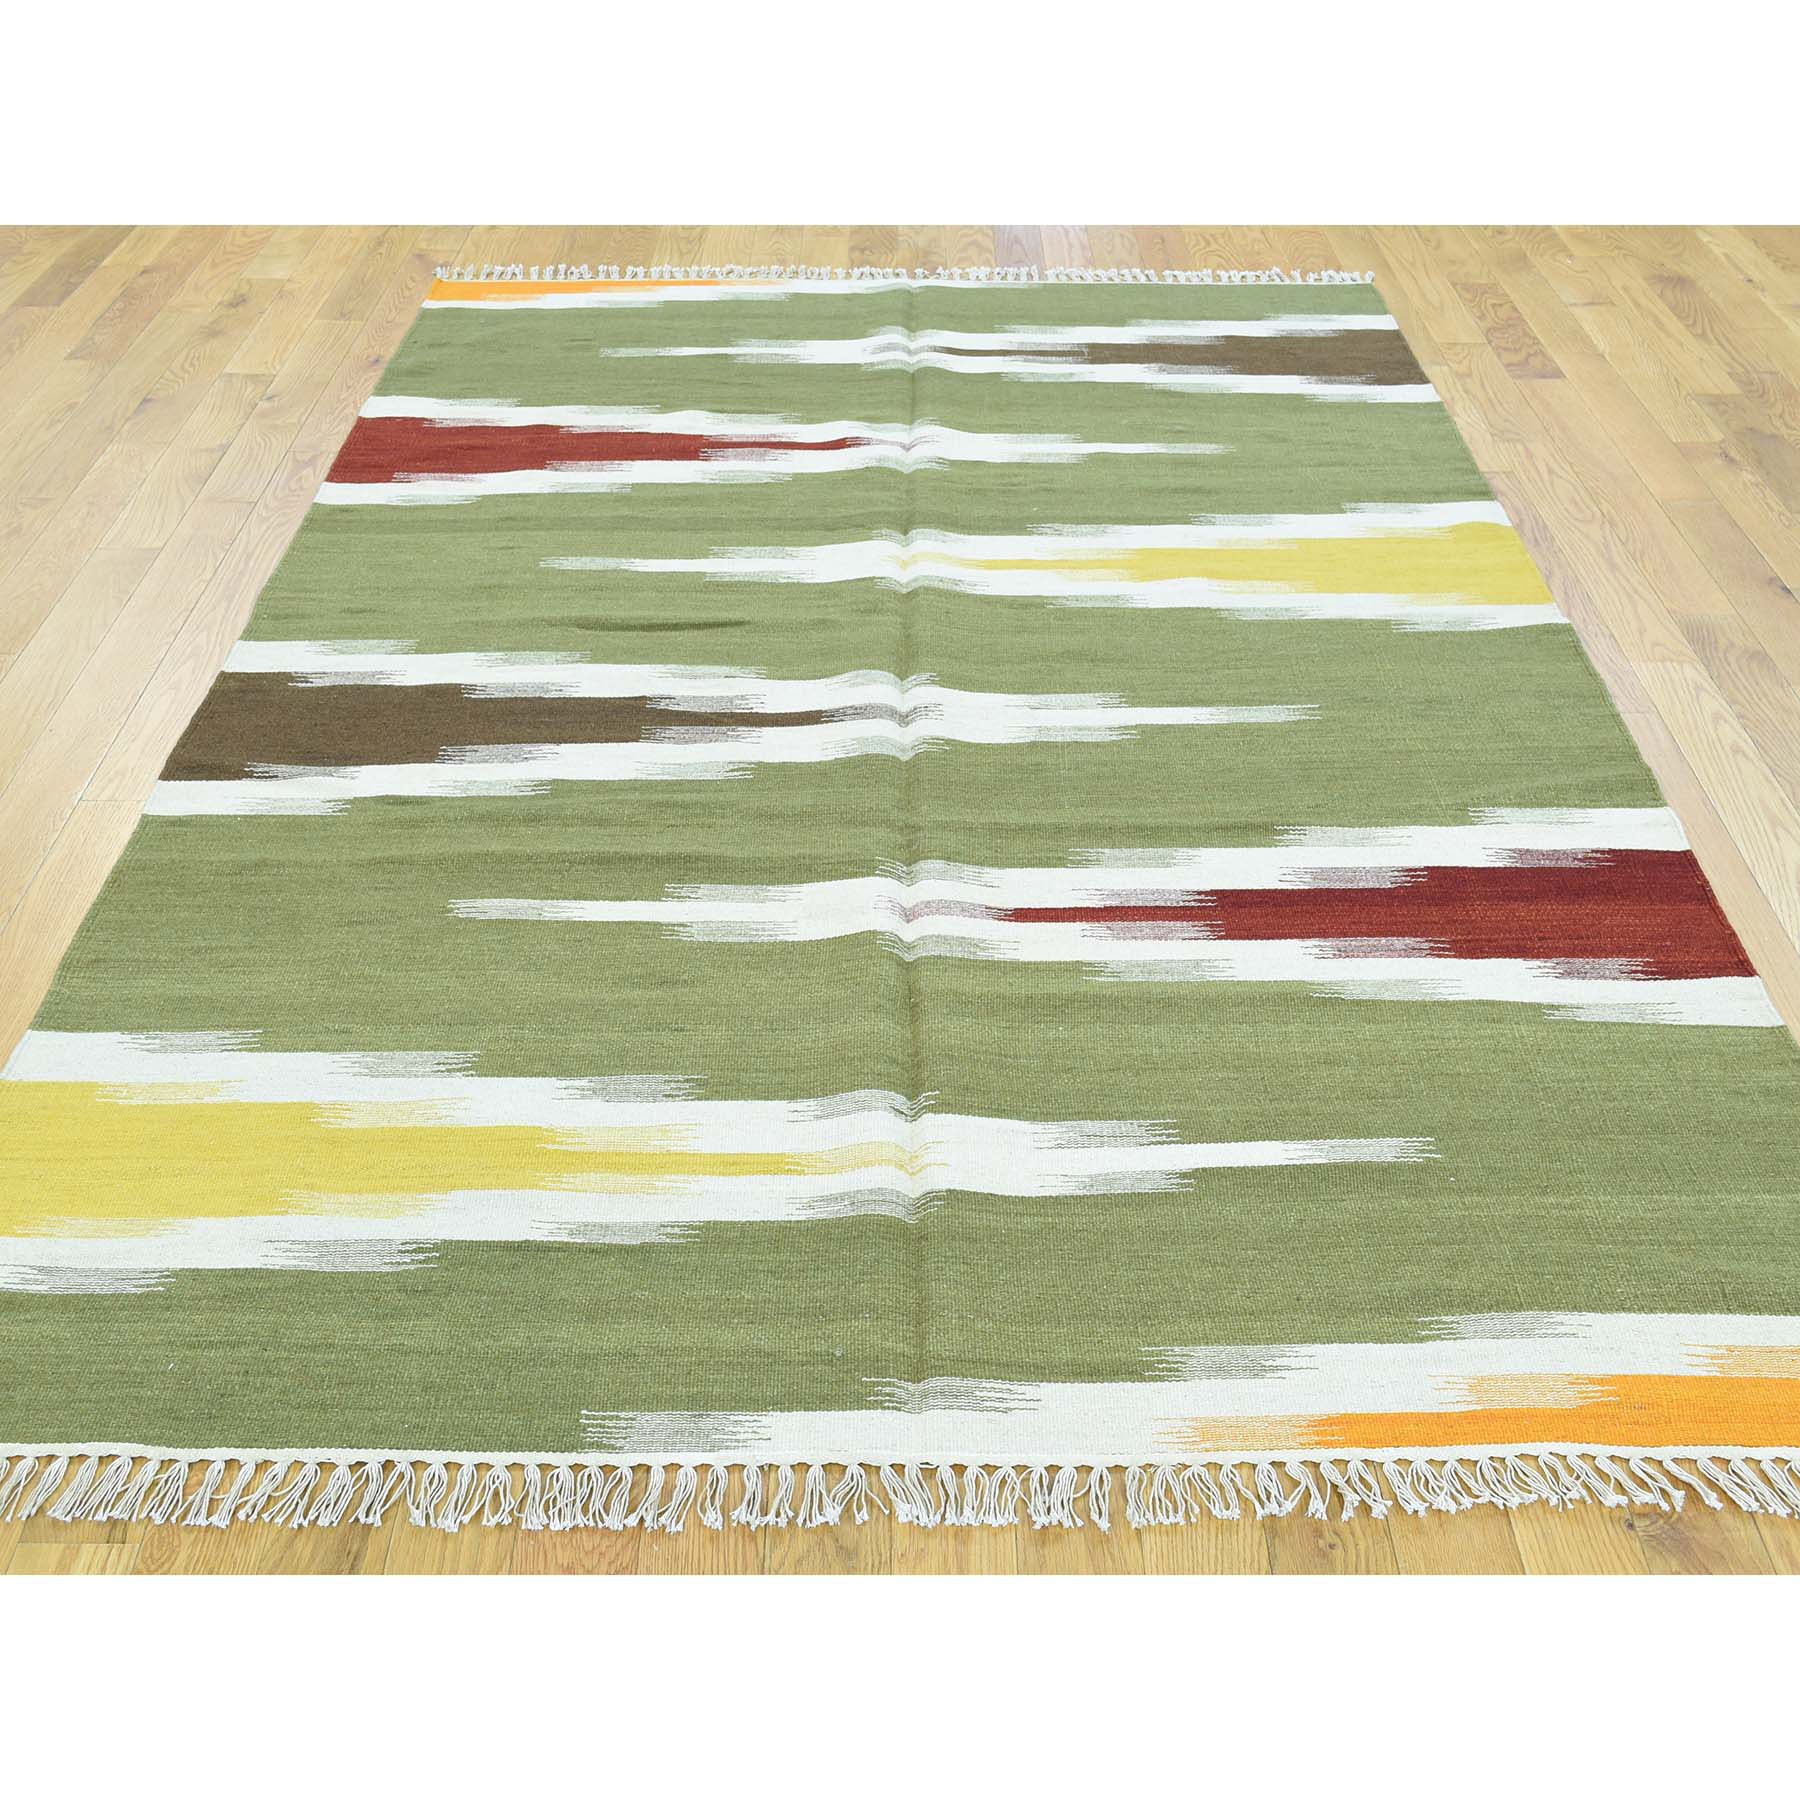 5'1"x8'1" Flat Weave Reversible Kilim Pure Wool Hand-Woven Colorful Rug 